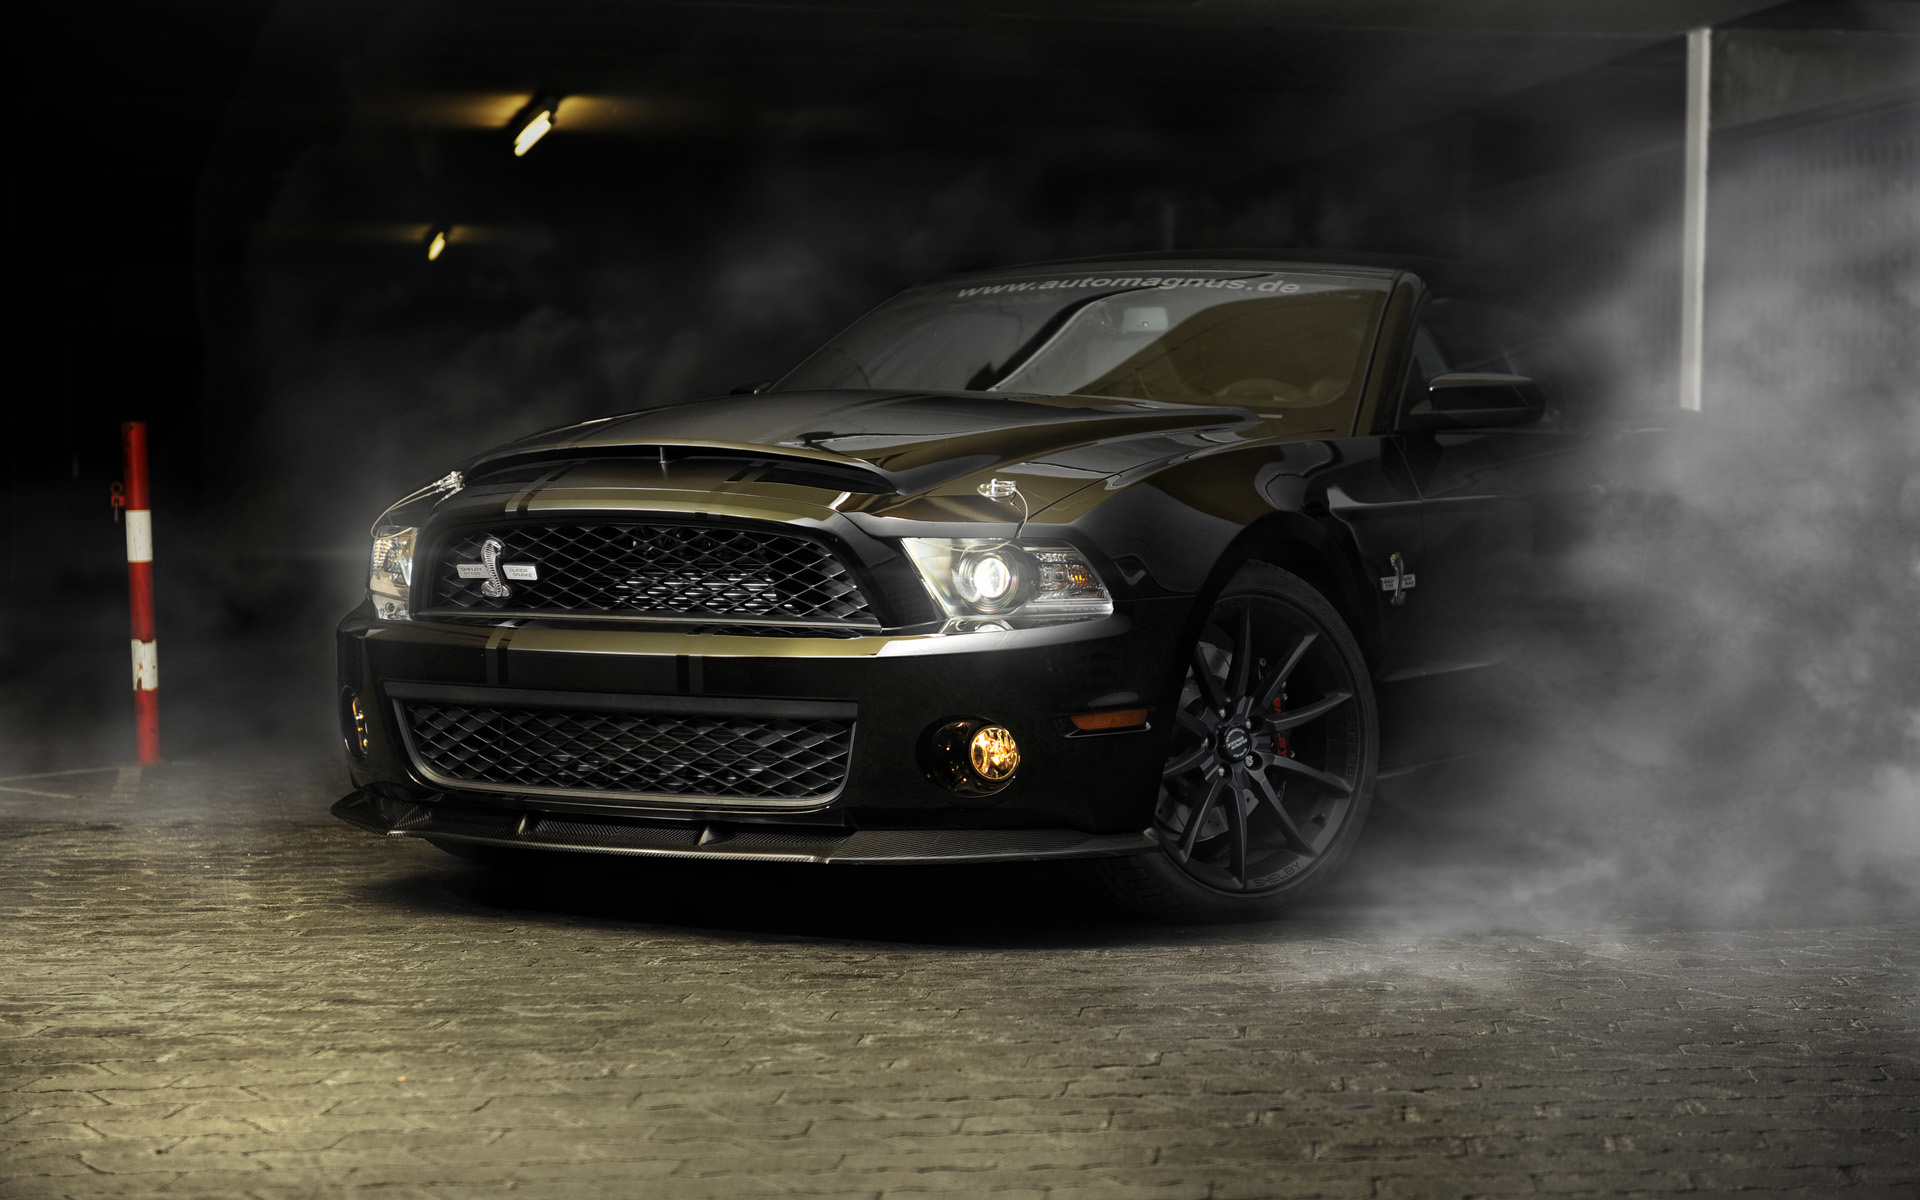 Ford Mustang Shelby Gt500 Wallpaper